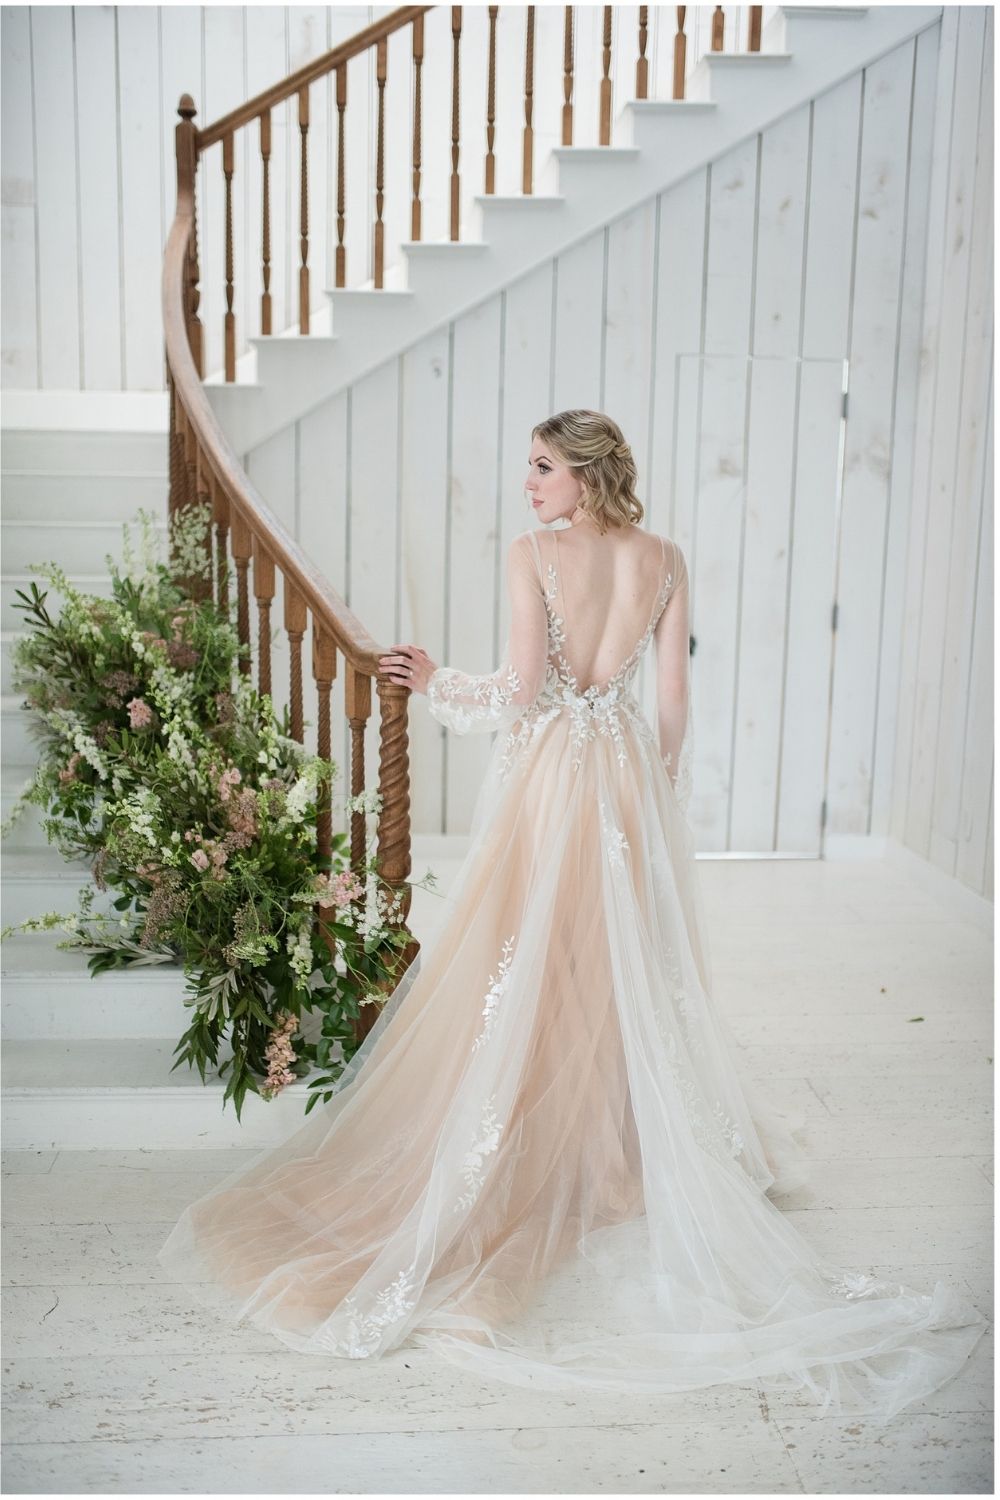 Bride in a coral A-line wedding dress with a low back